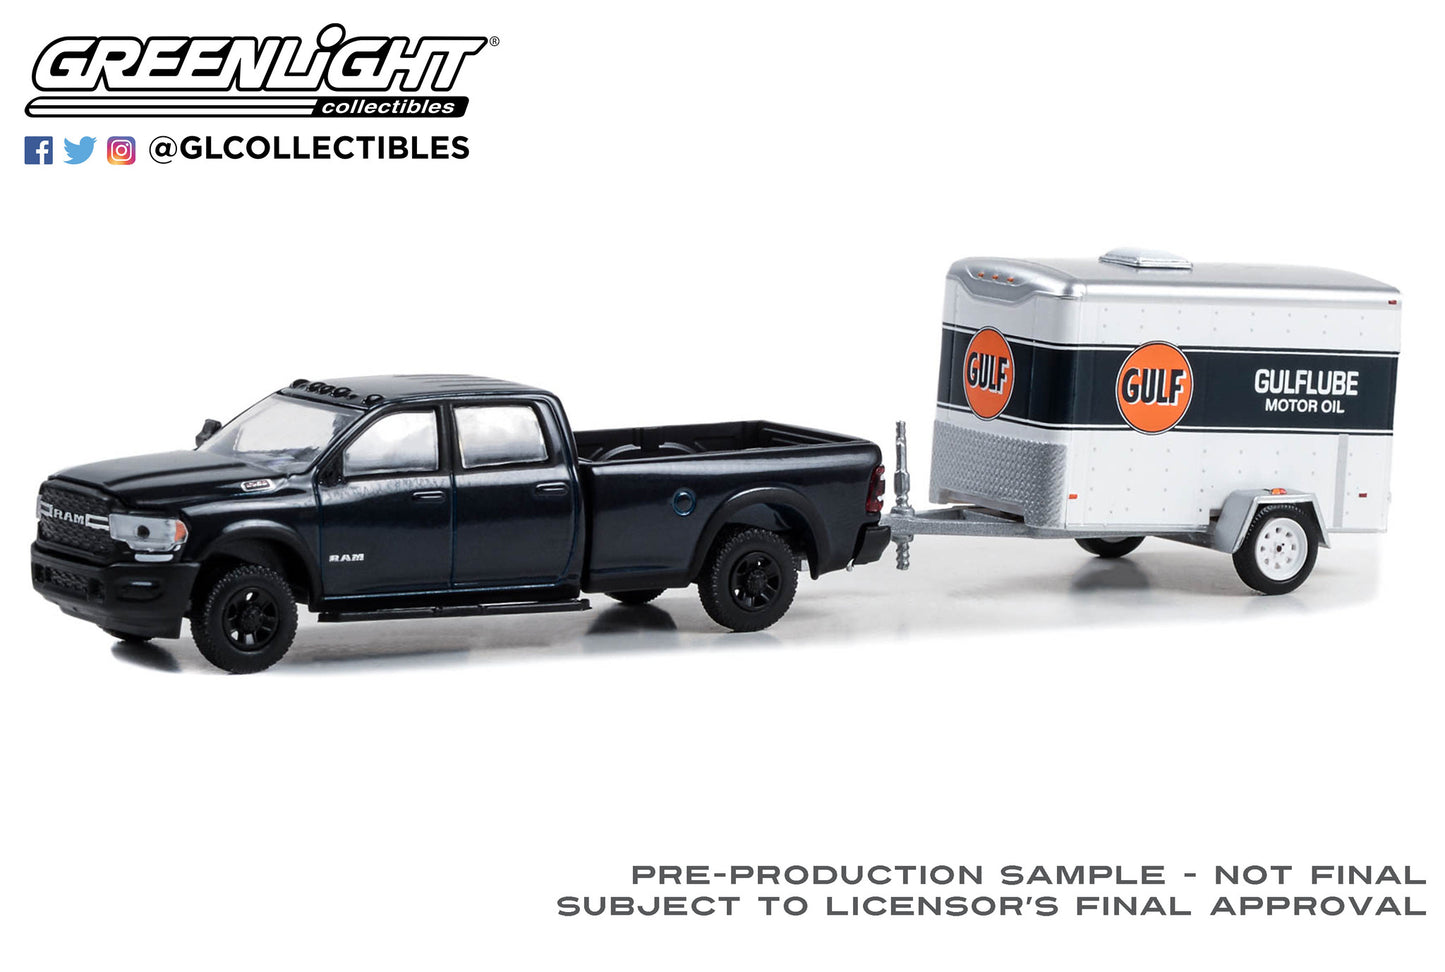 GreenLight 1:64 Hitch & Tow Series 29 - 2023 Dodge Ram 2500 - Gulf Oil with Small Gulflube Motor Oil Cargo Trailer 32290-D